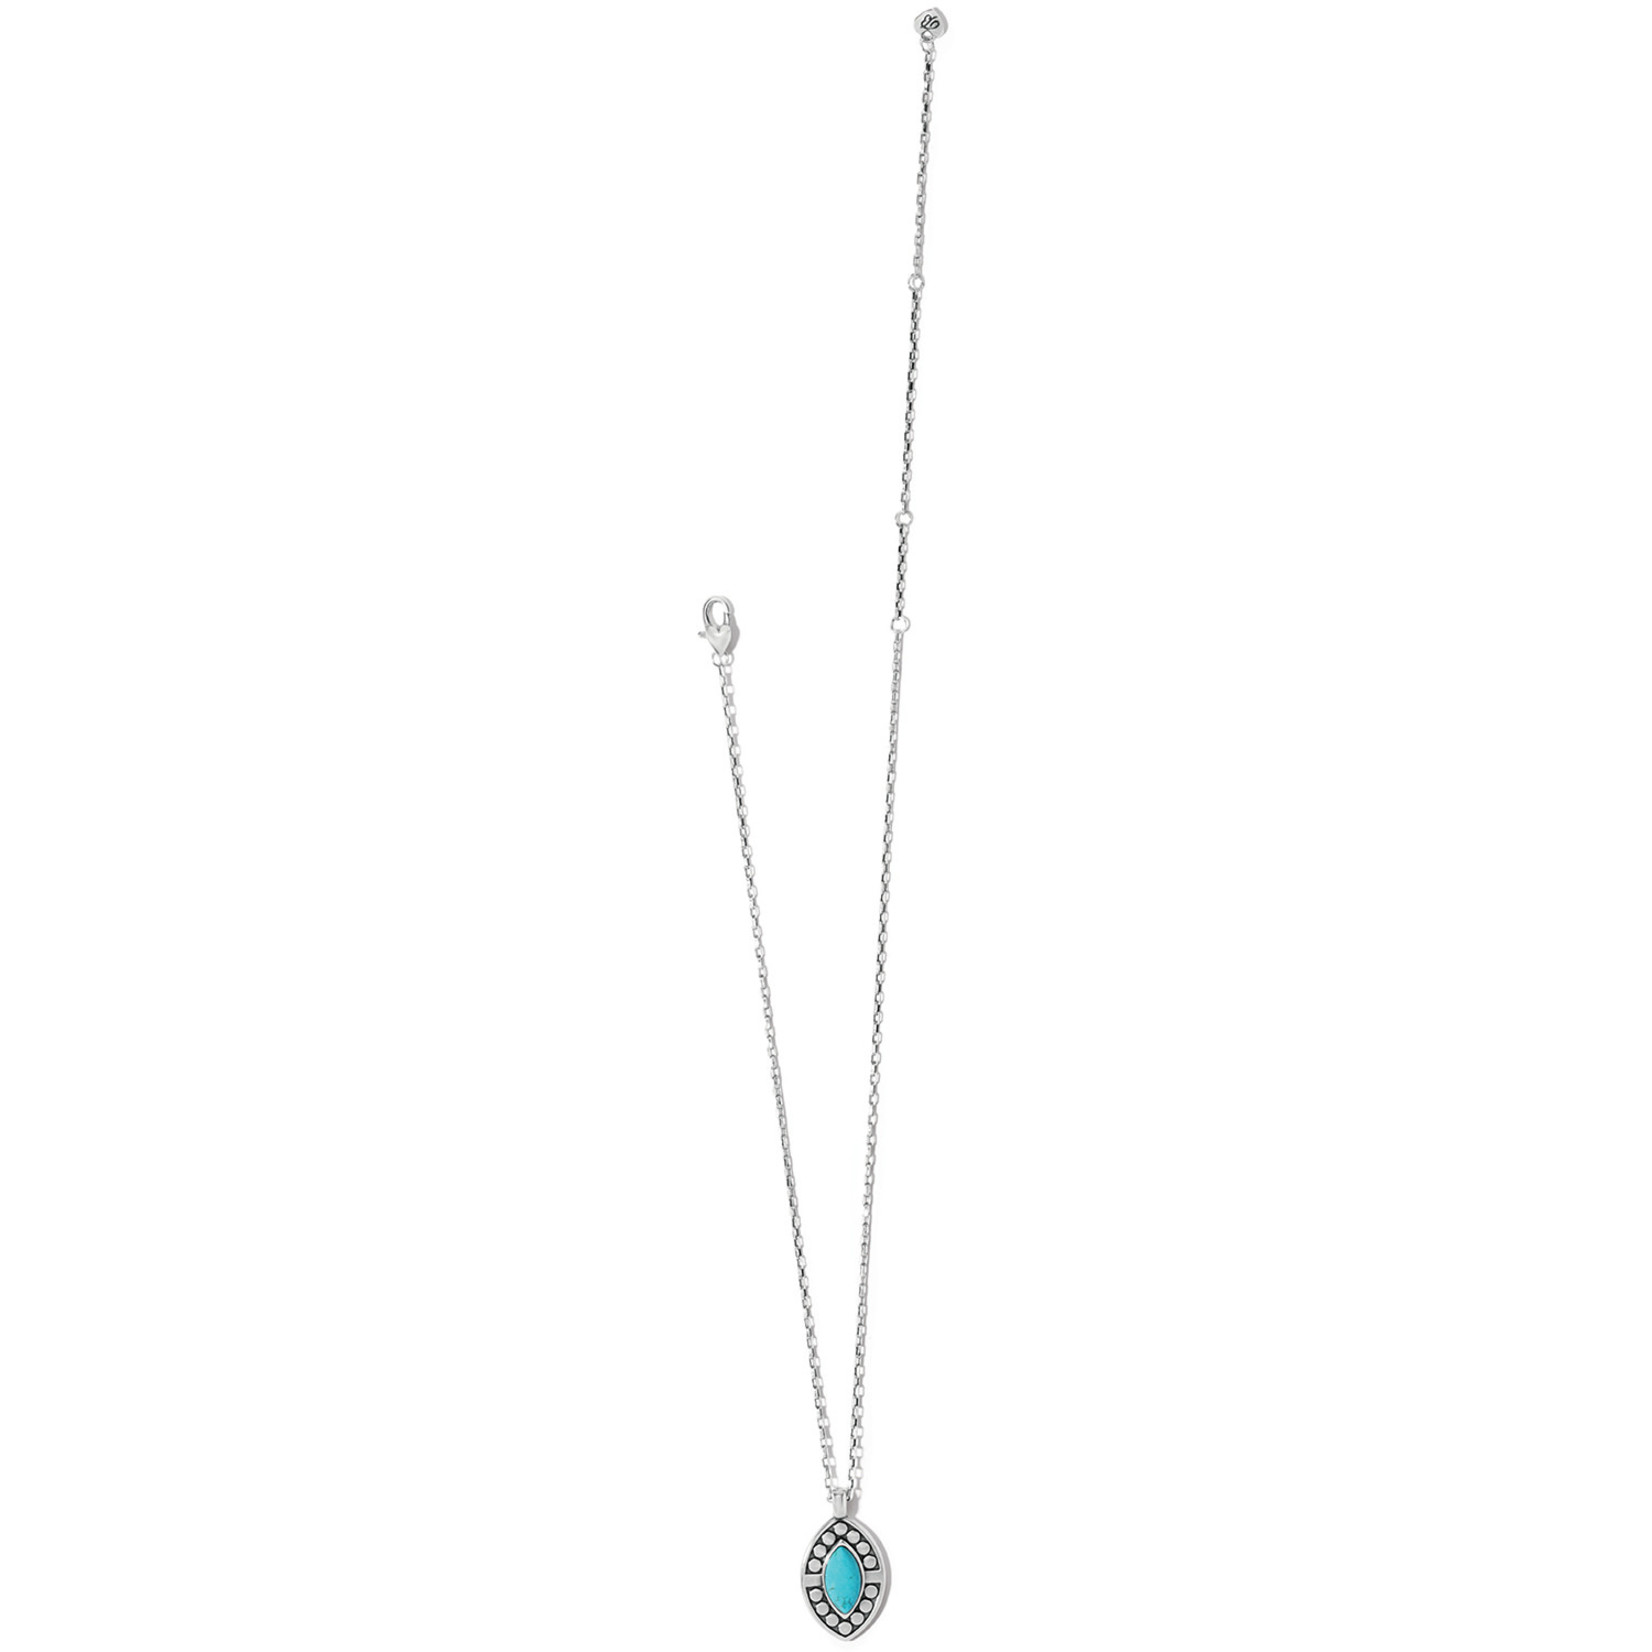 Brighton Pebble Dot Dream Short Necklace - Silver-Turquoise, OS